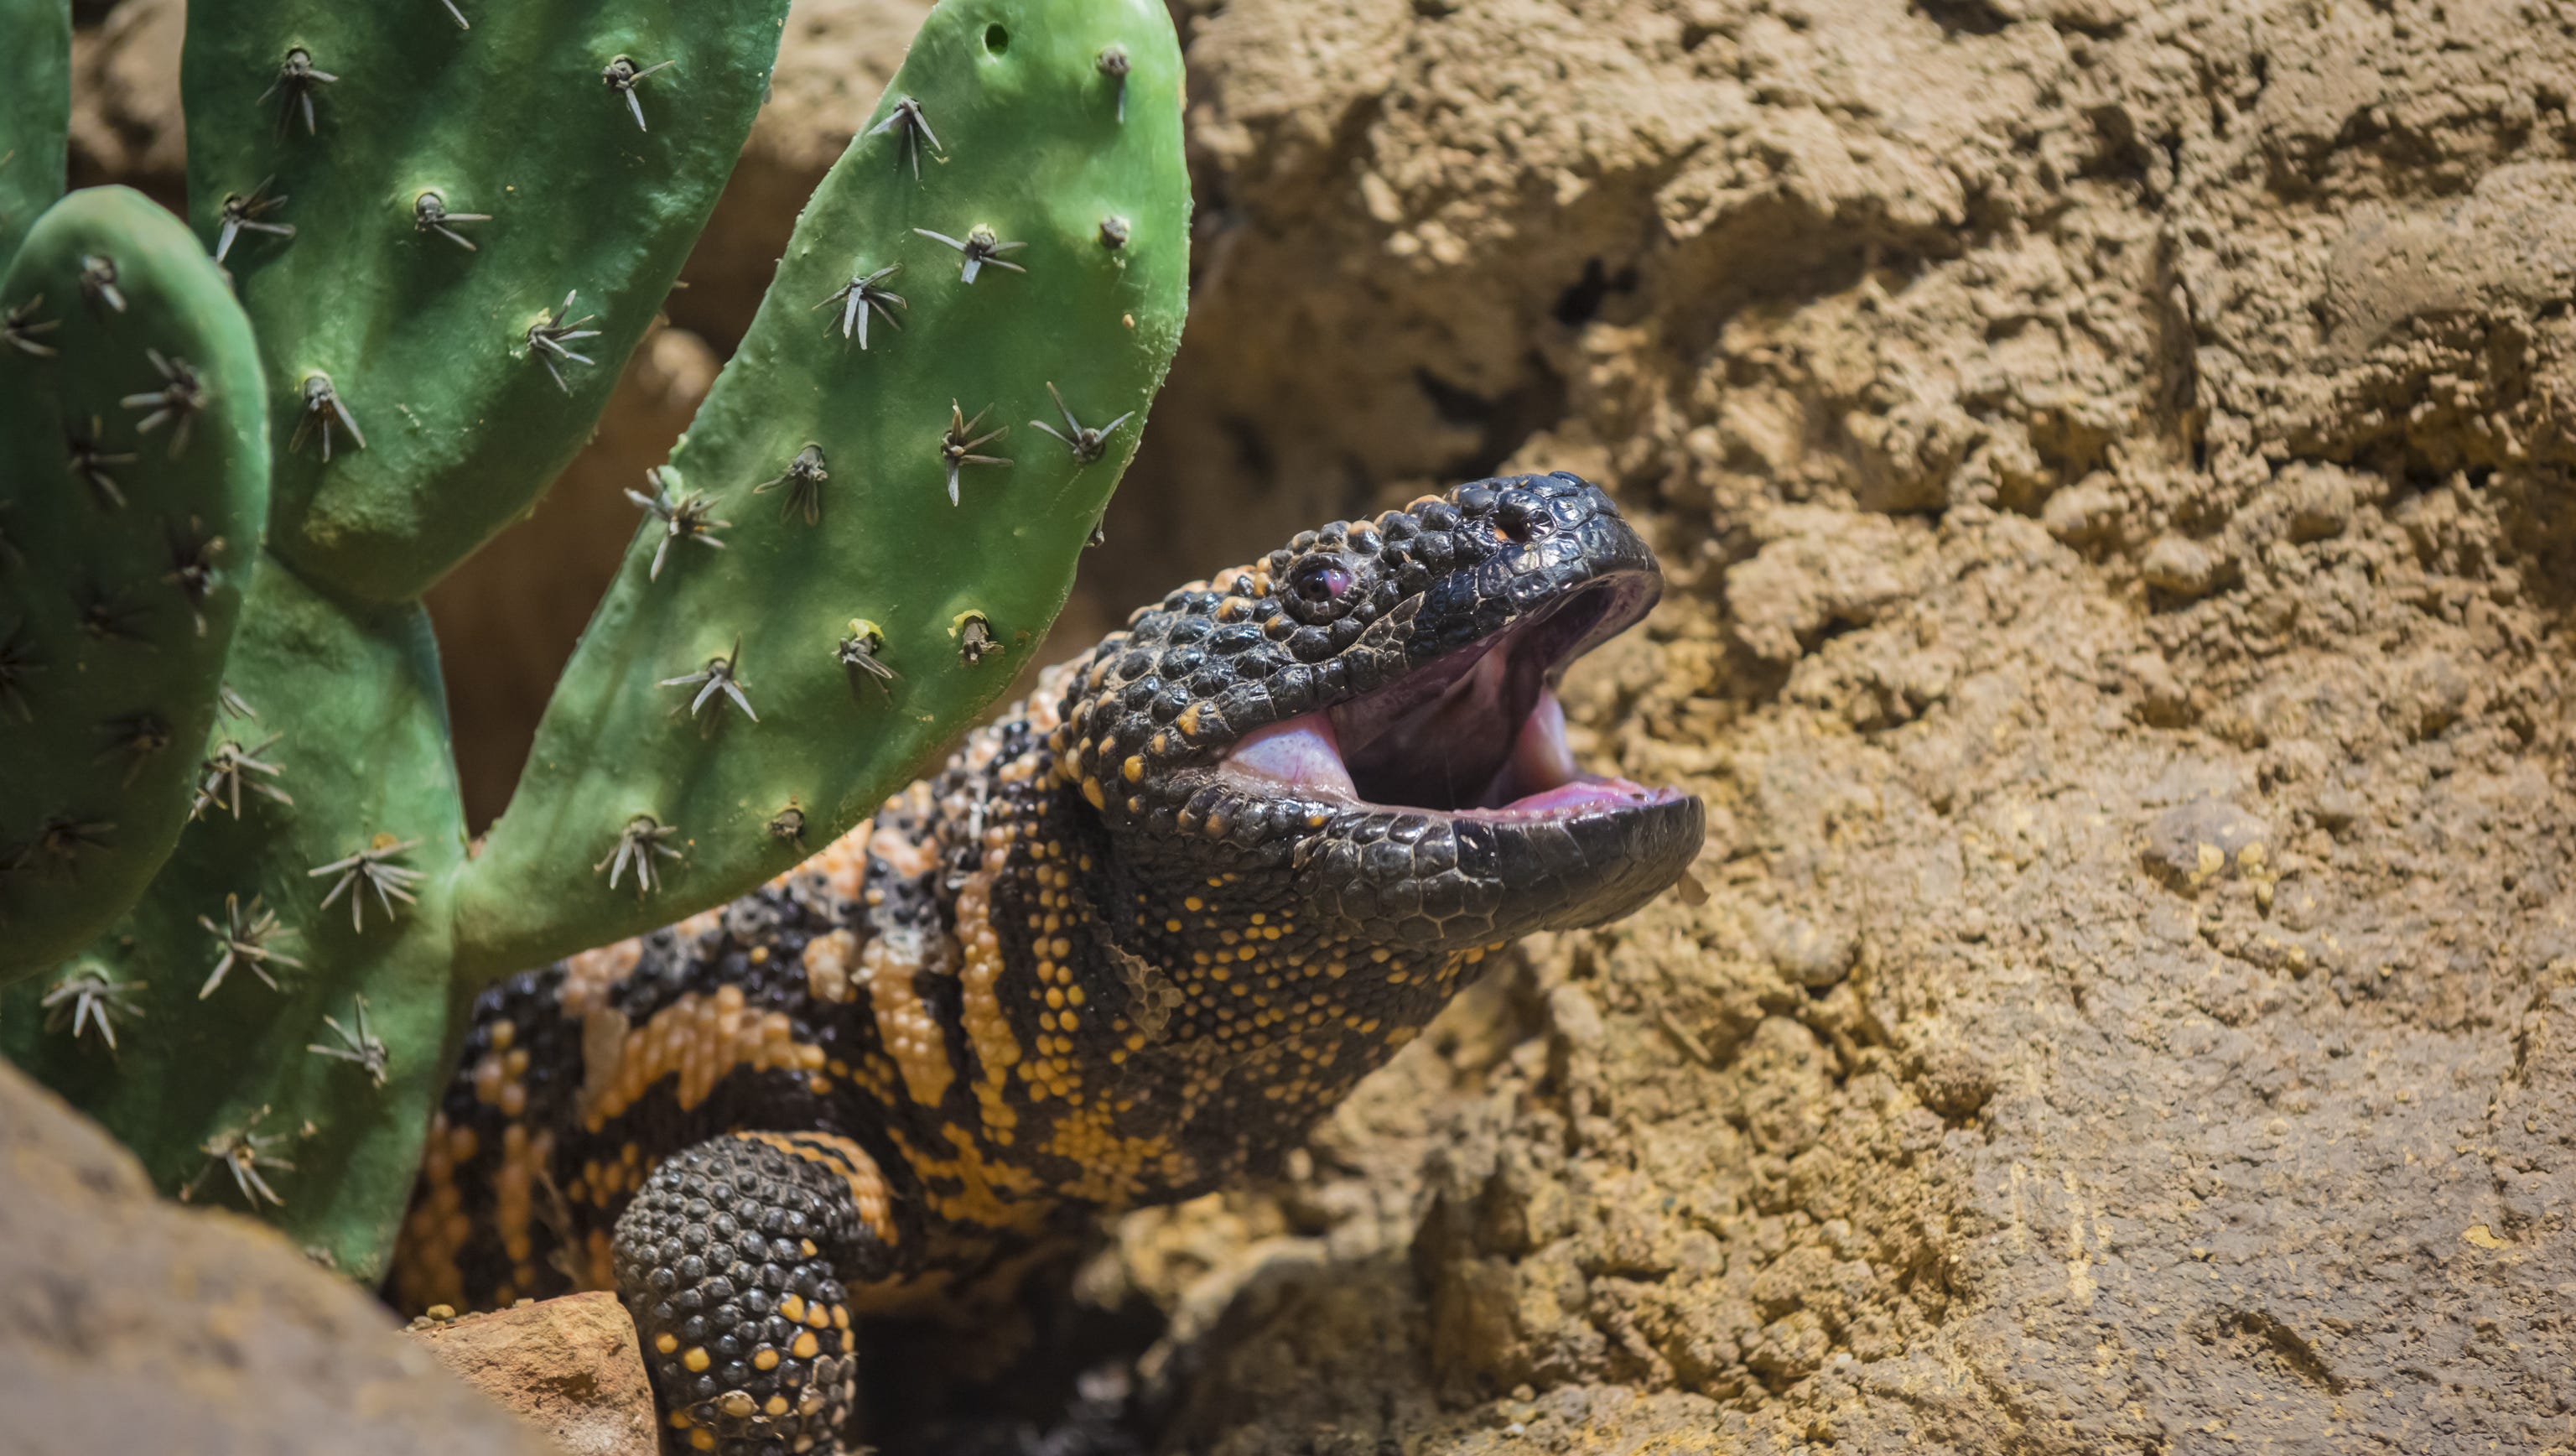 The only venomous lizard in America, the gila monster is federally protected and illegal to capture. Arizona has two limited license provisions for ownership: for education and wildlife rehabilitator.